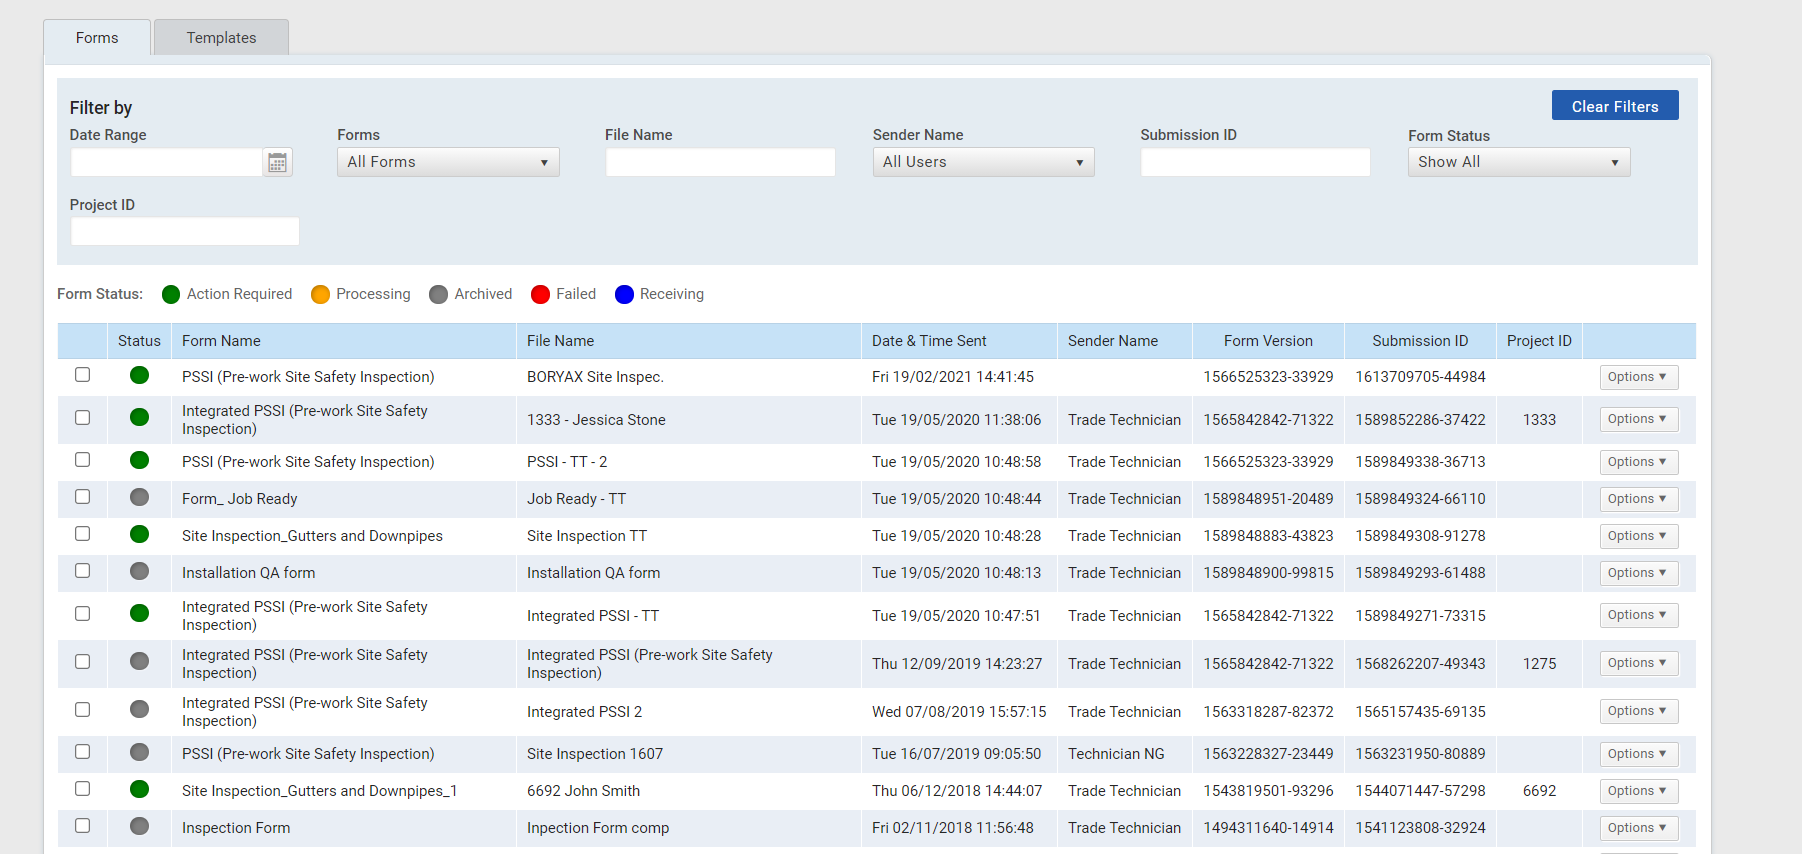 A screenshot of the submissions overview in the eForms portal, with a list of forms, their file names, and date and time sent.